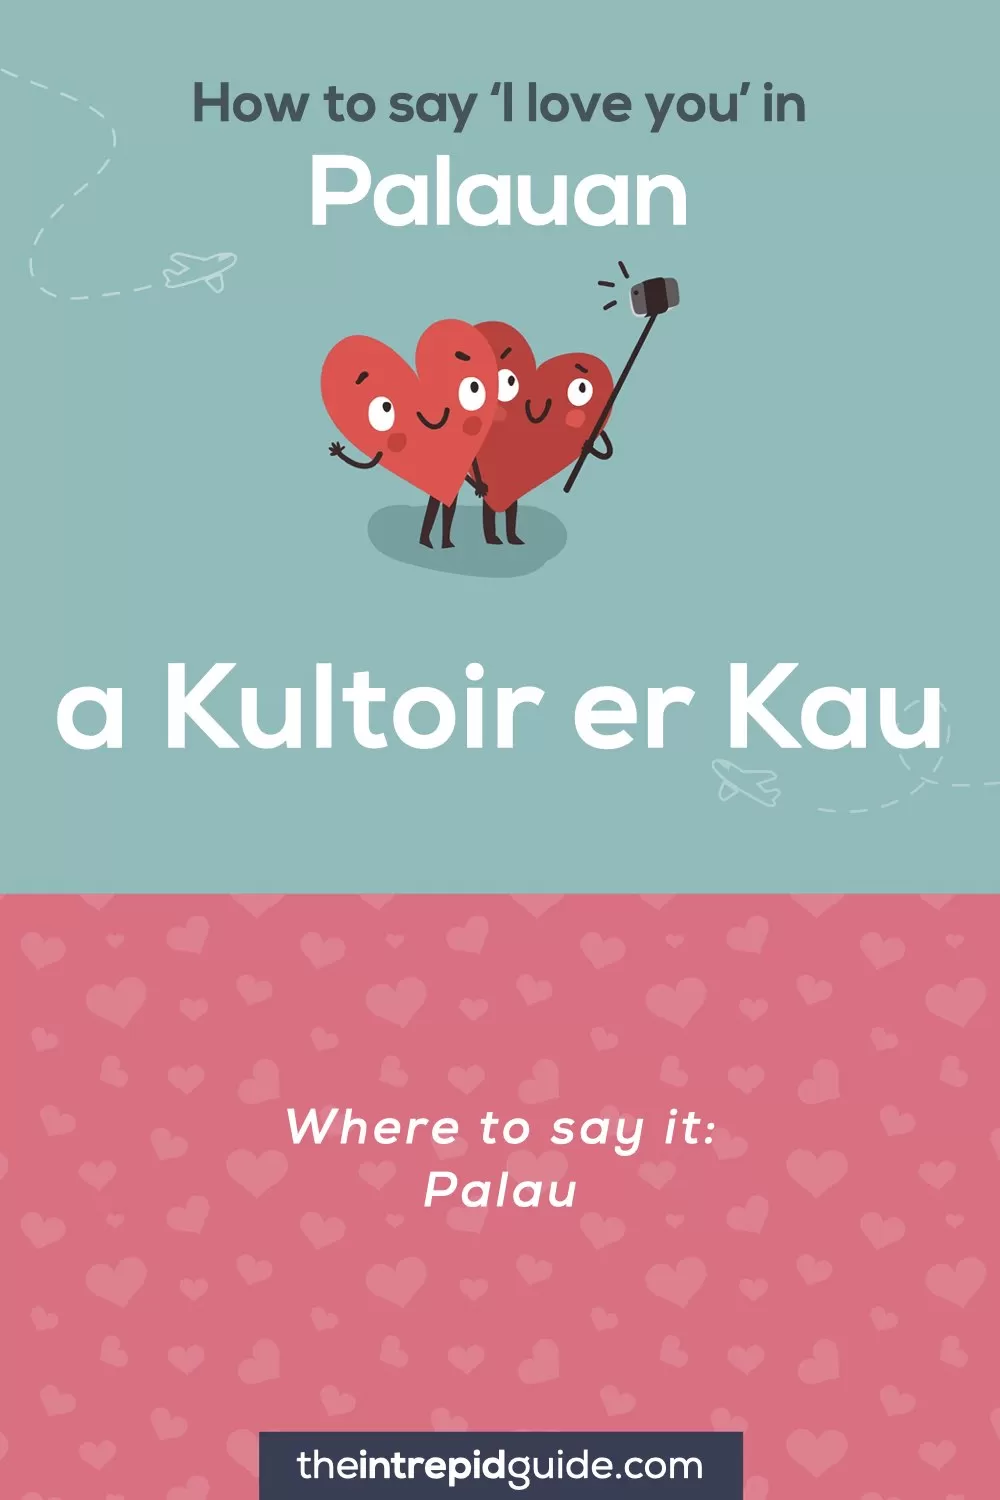 How to say I love you in different languages - Palauan - a Kultoir er Kau